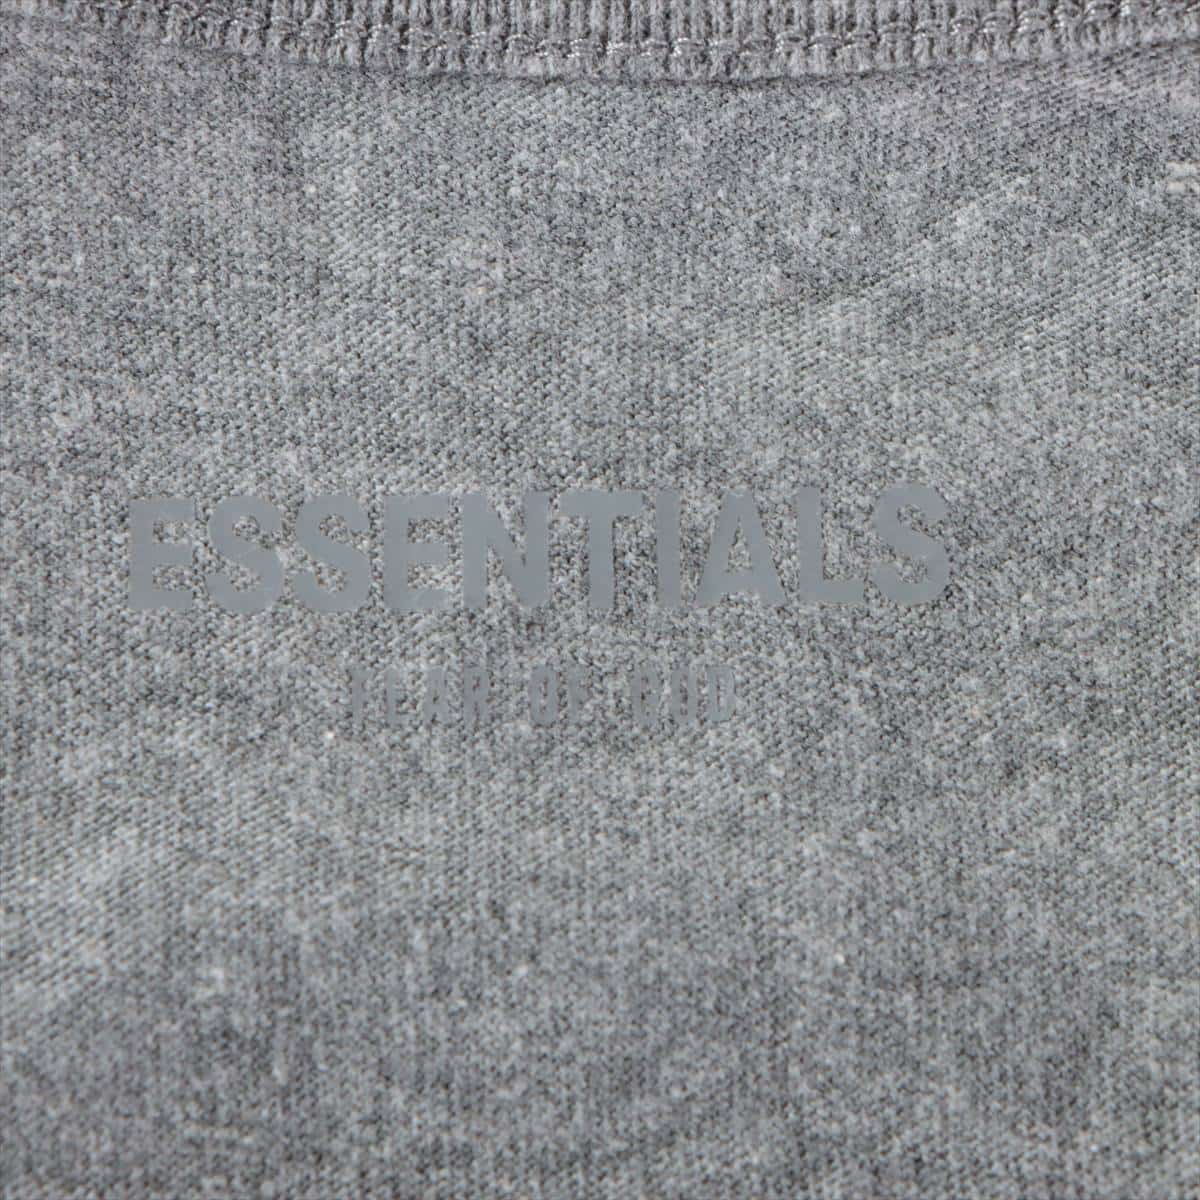 FEAR OF GOD Essentials Cotton & polyester Tank top S Men's Grey